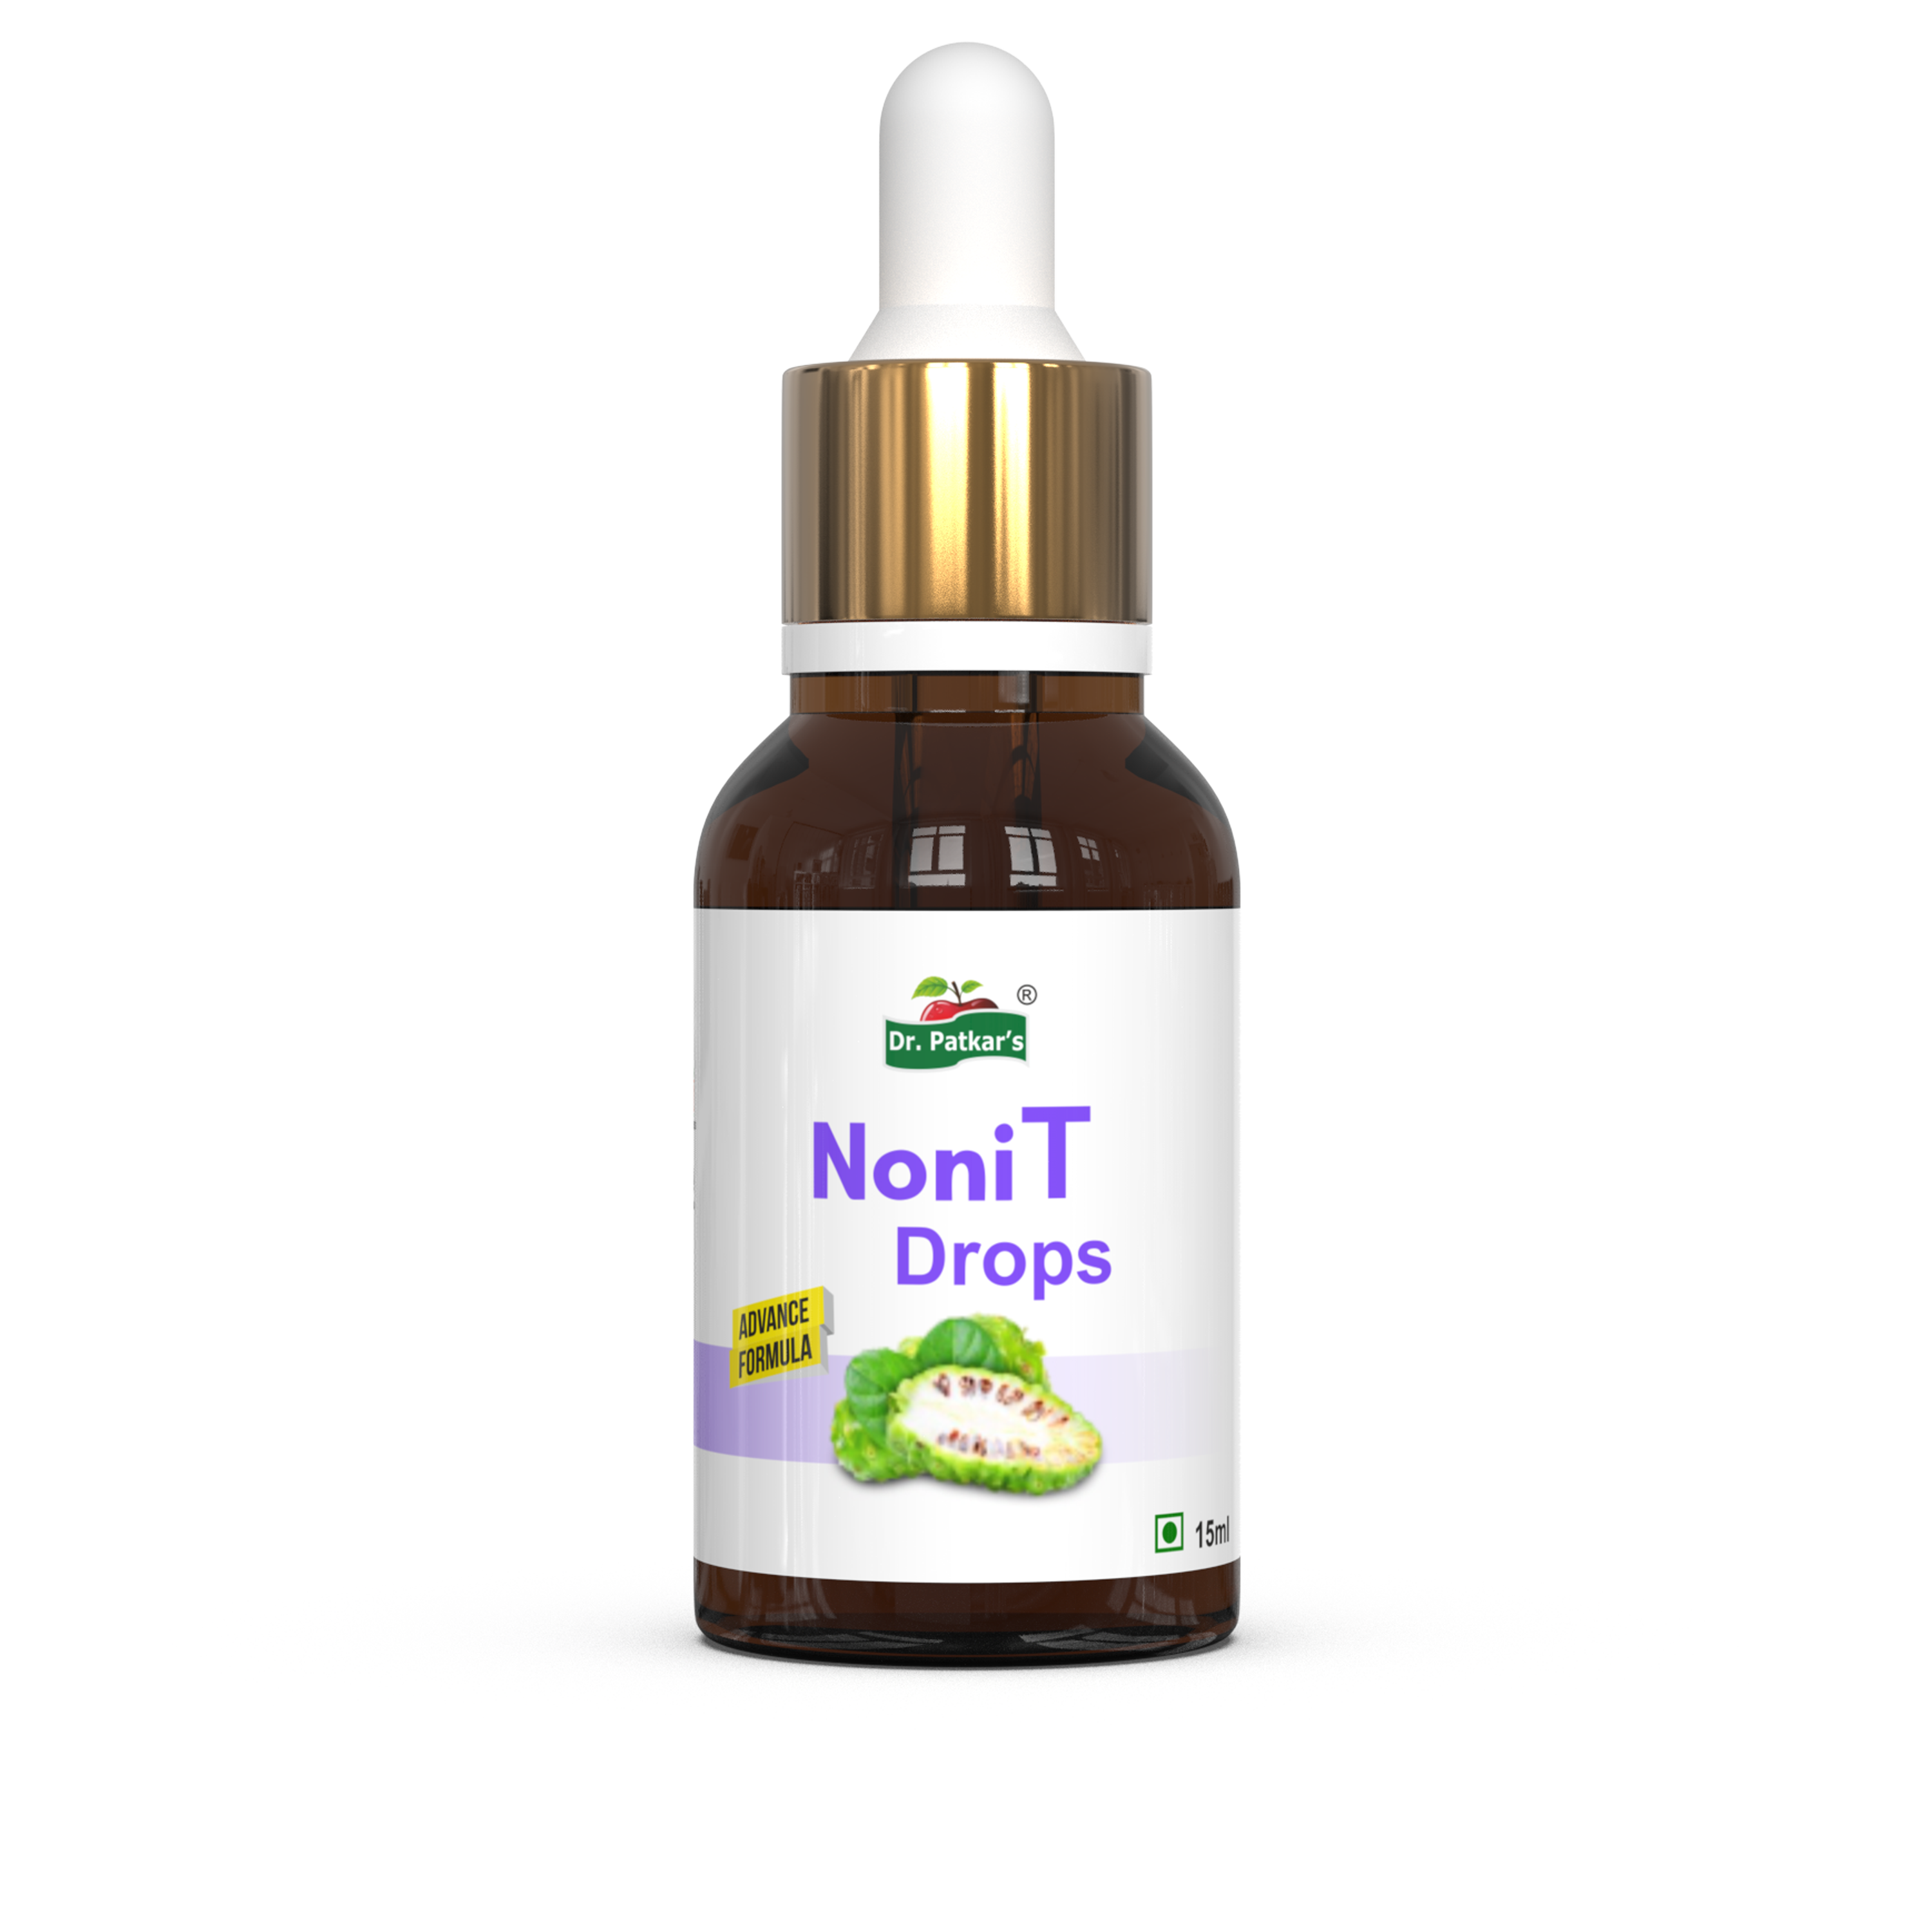 Buy Dr. Patkar's NoniT Drops at Best Price Online